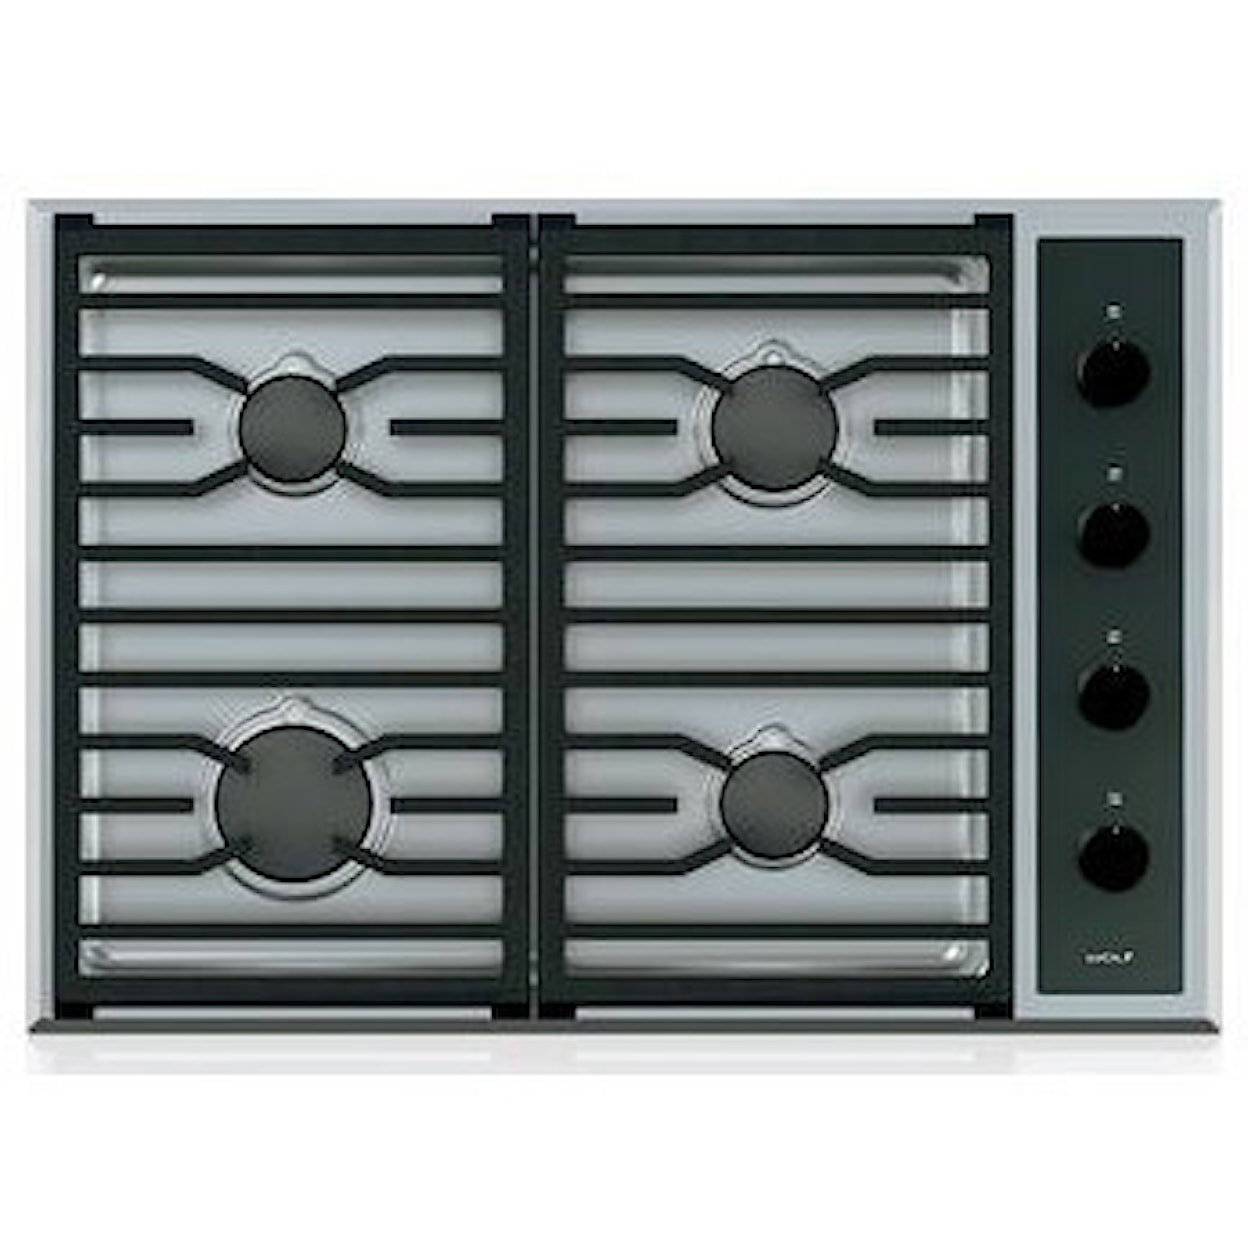 Wolf Gas Cooktops 30" Transitional Gas Cooktop - 4 Burners